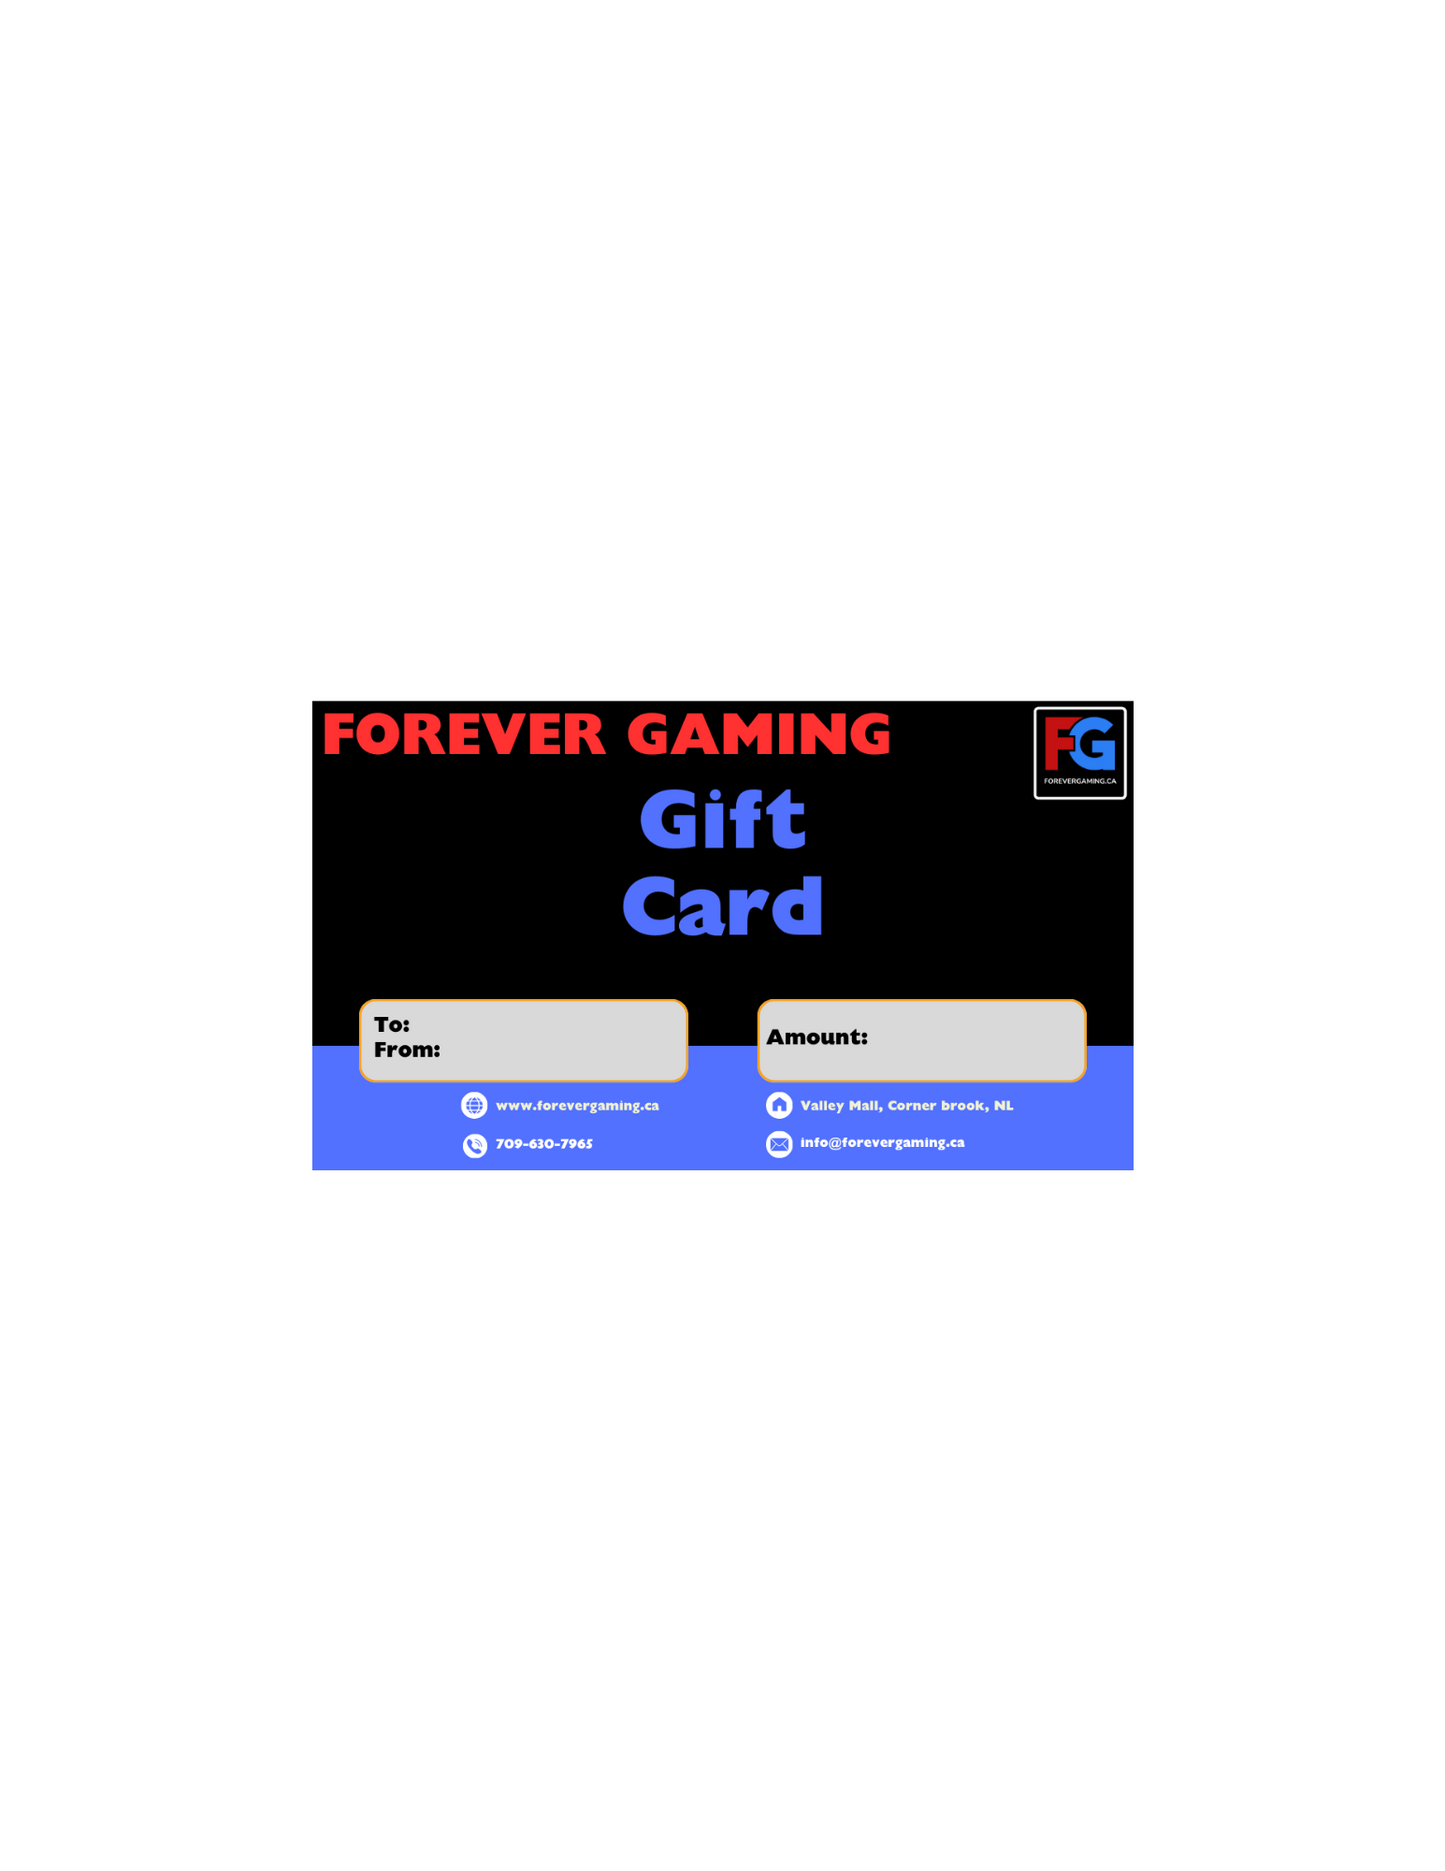 $10 Forever Gaming Gift Card